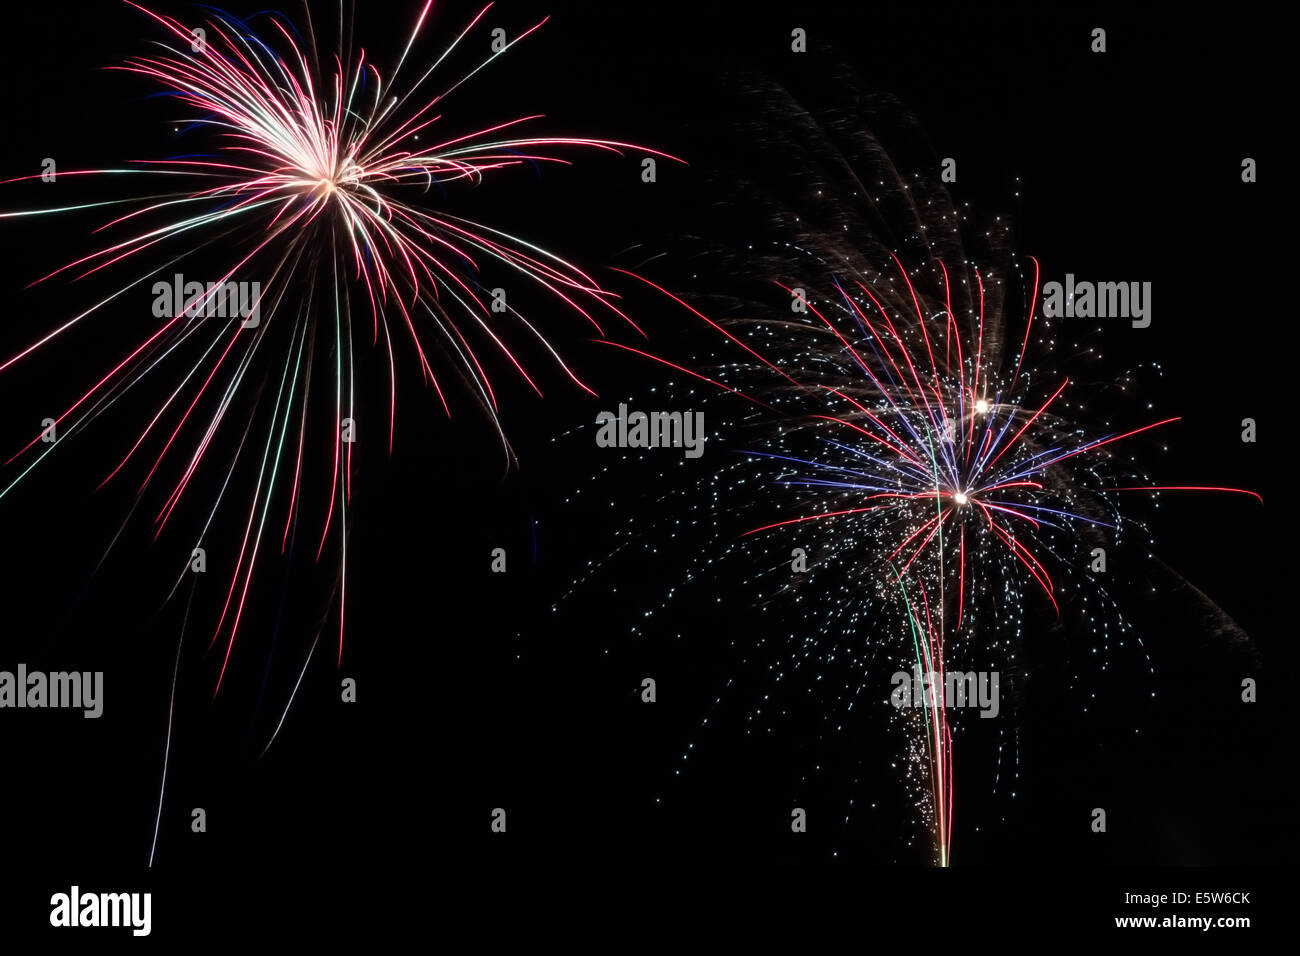 Beautiful multi-colored fireworks exploding in the night sky. Stock Photo